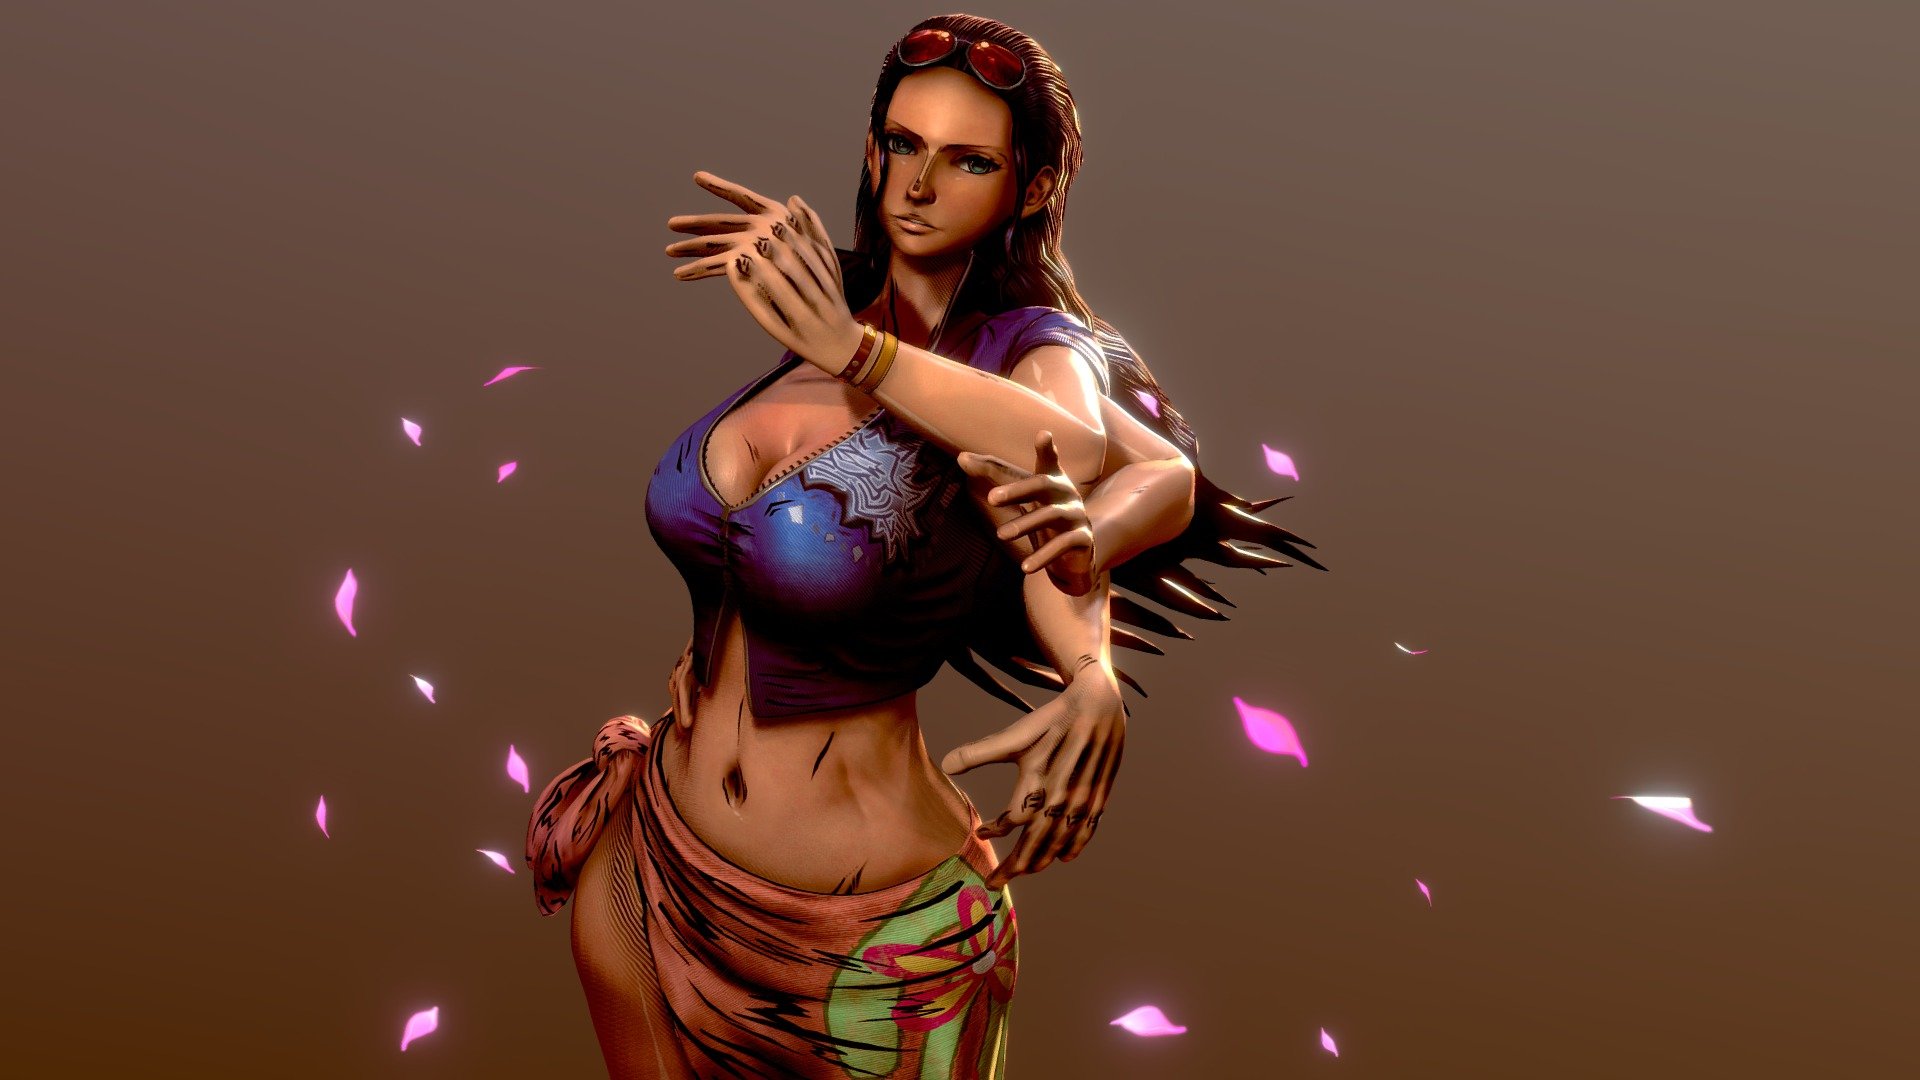 Finished fanart off Nico Robin from One Piece that I worked on this year. Hope you like it!

More details on my Artstation: https://www.artstation.com/artwork/149A13 - Nico Robin - One Piece (Fanart) - 3D model by ChristheLancer 3d model